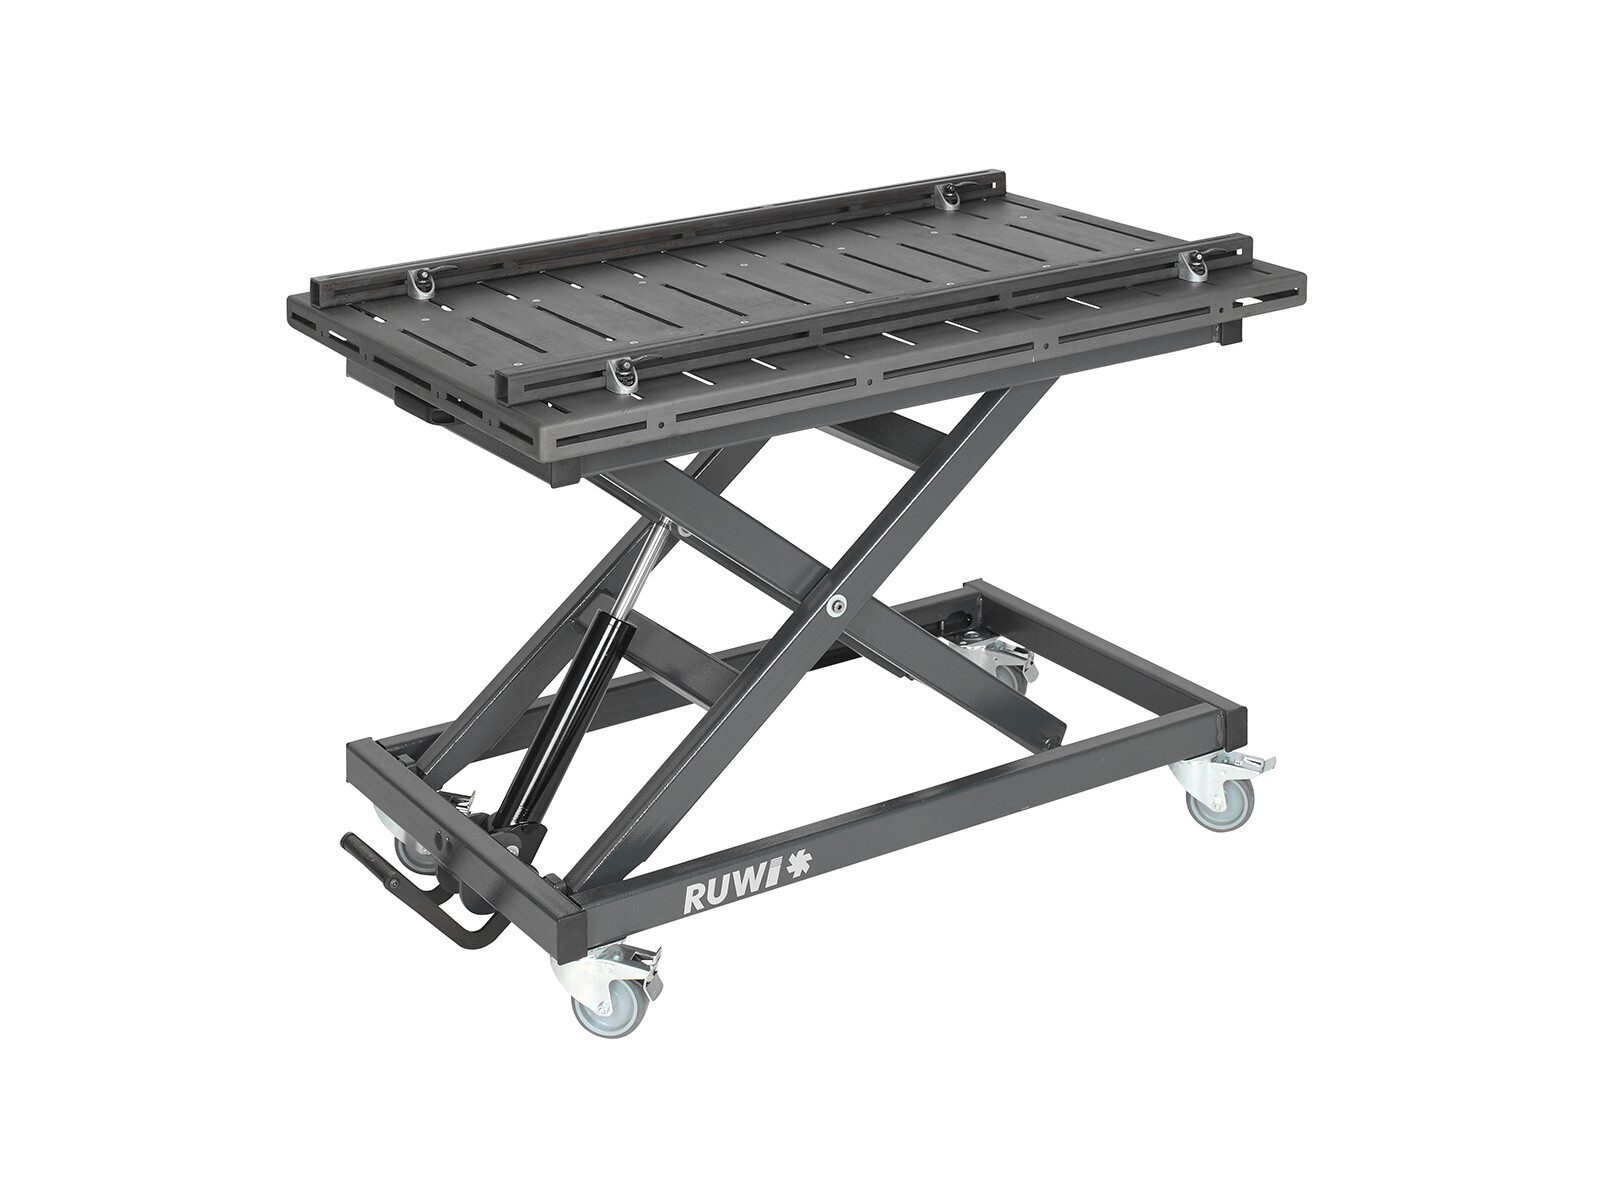 RUWI welding table groove - lifting table set with stop rails 1200 x 800 mm